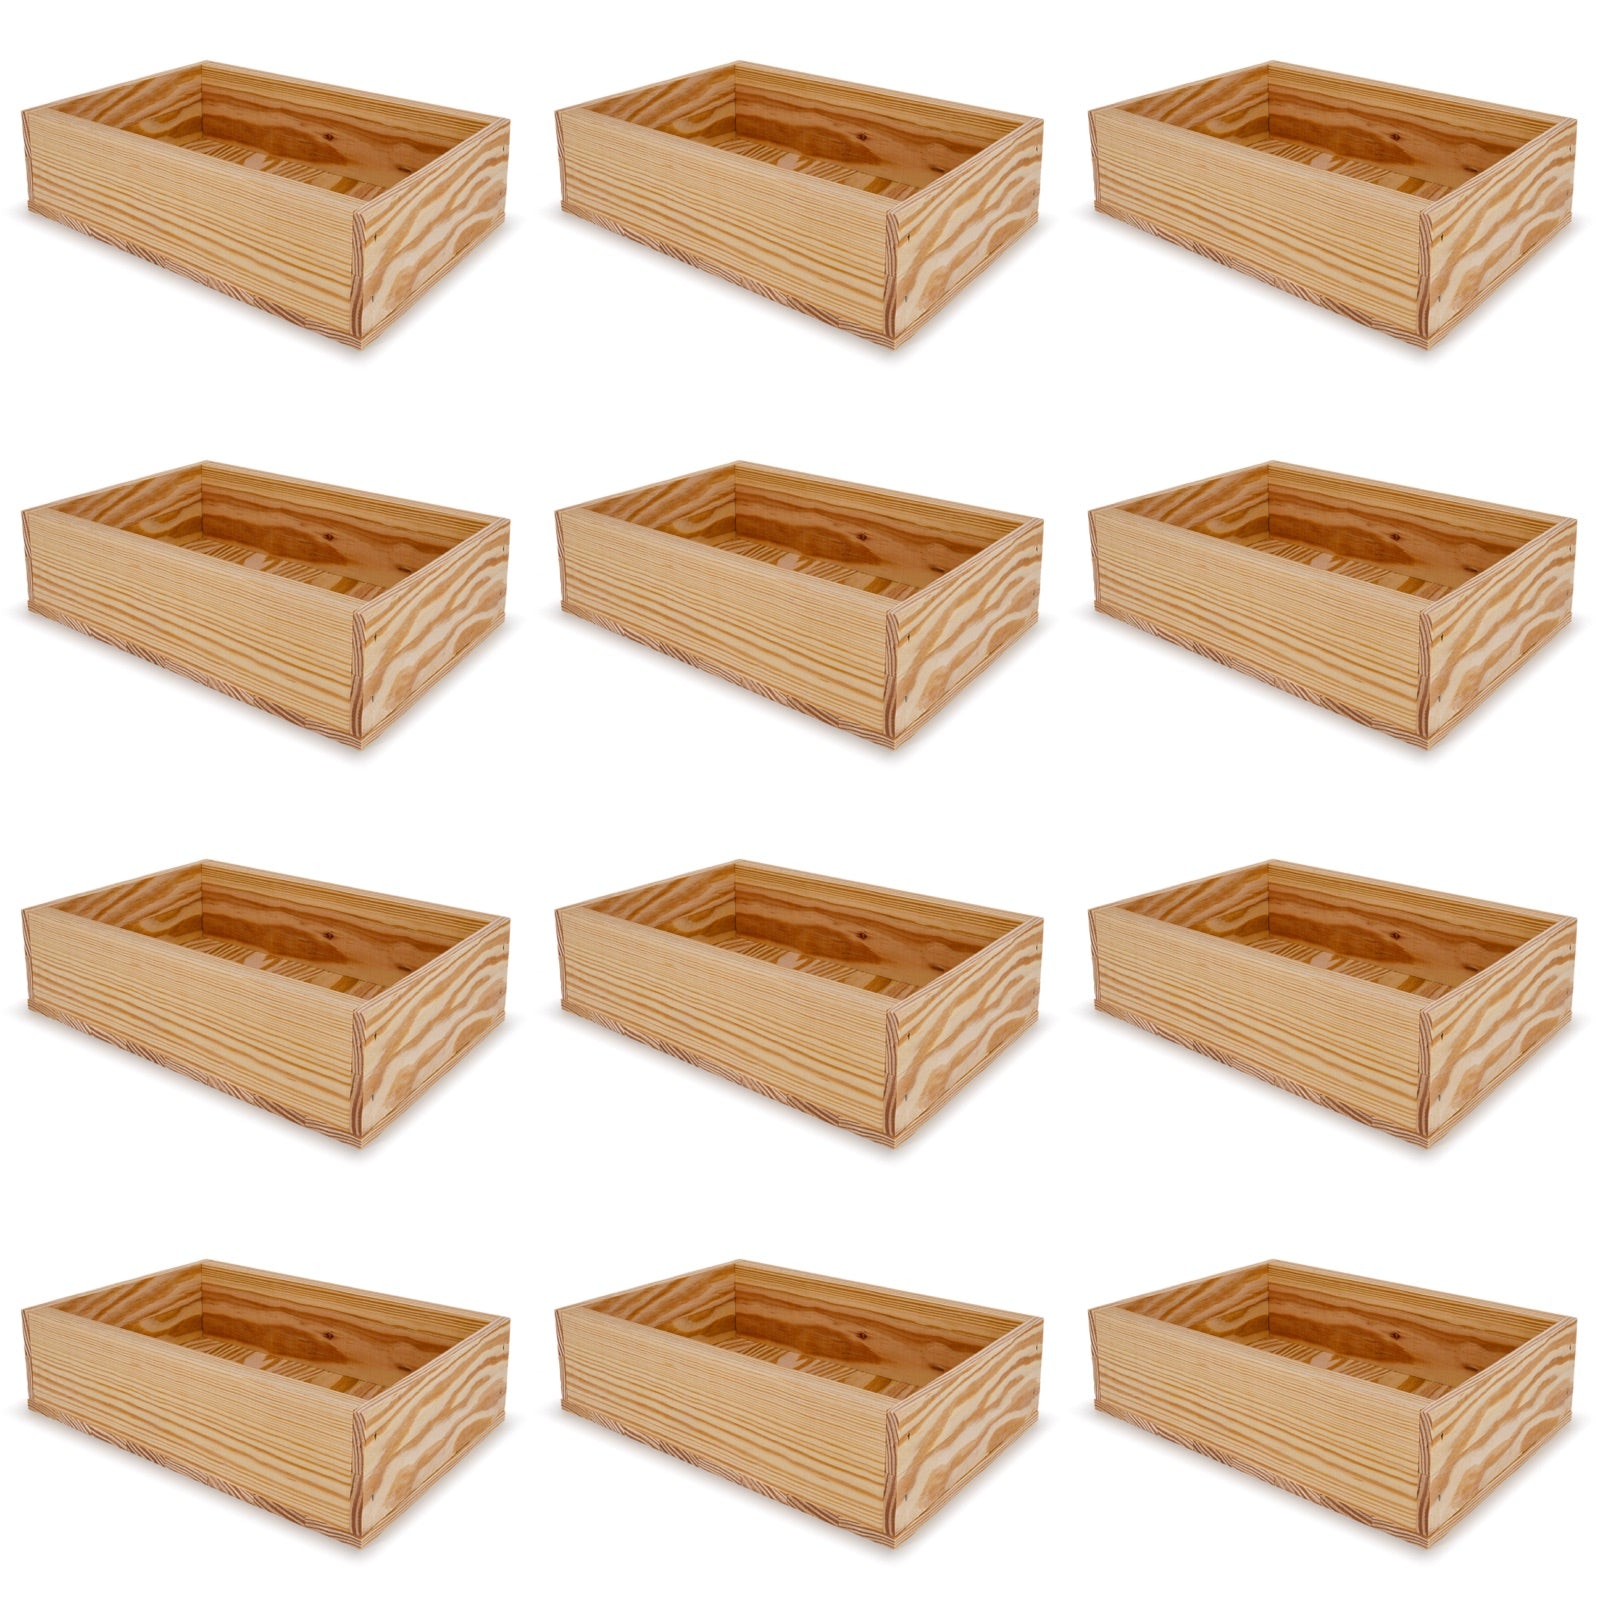 12 Small wooden crates 8x13.25x3.5